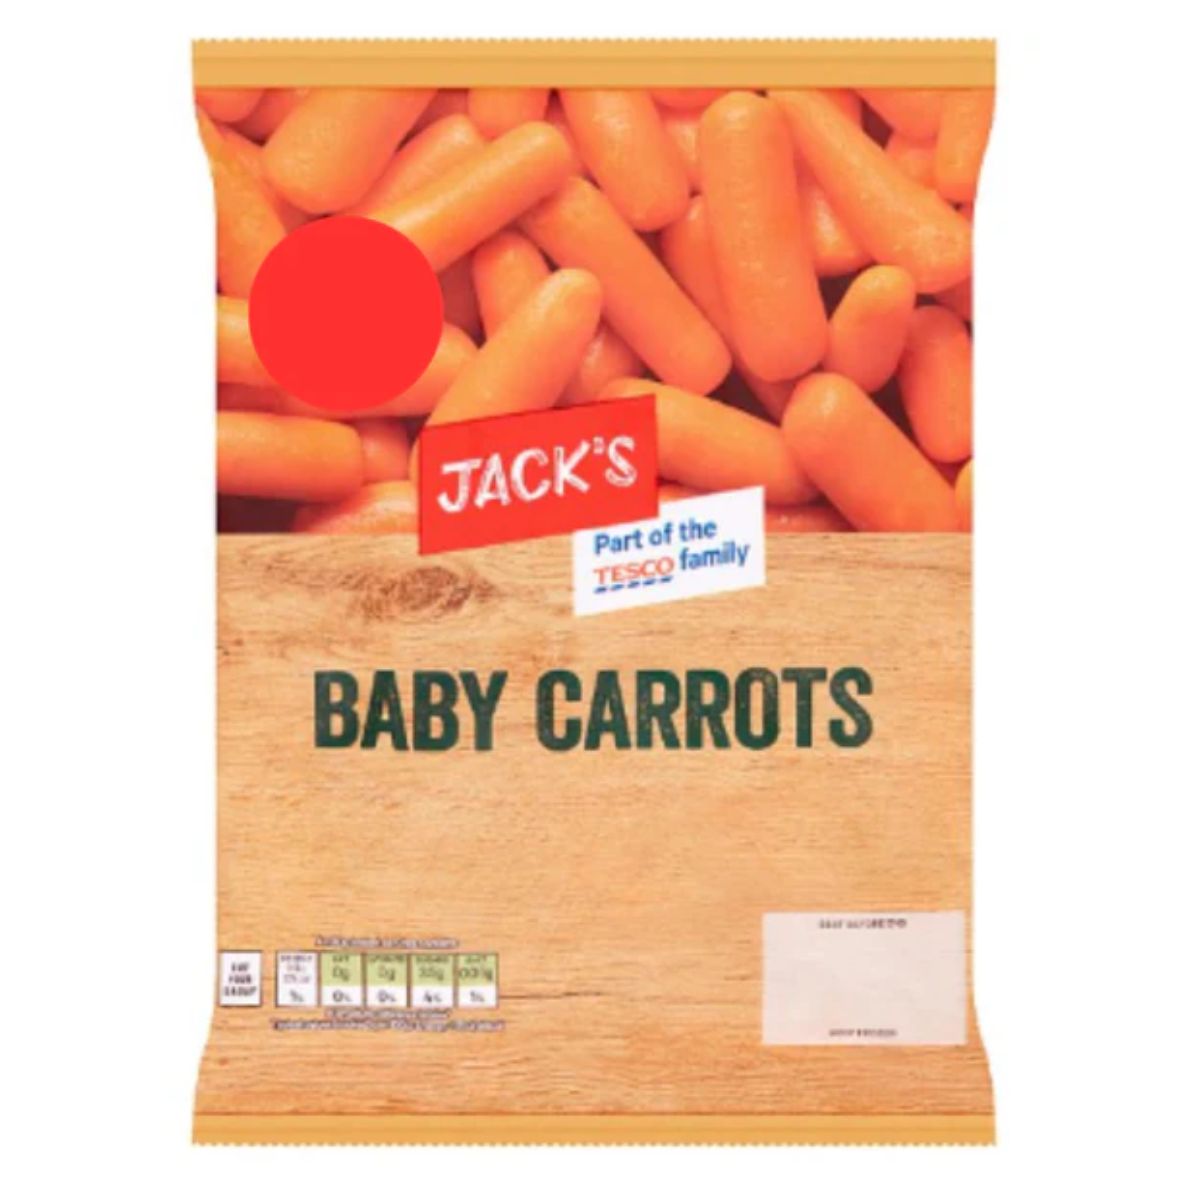 A package of Jack's - Baby Carrots - 500g, stating "part of the tesco family" with a red circular logo at the top.